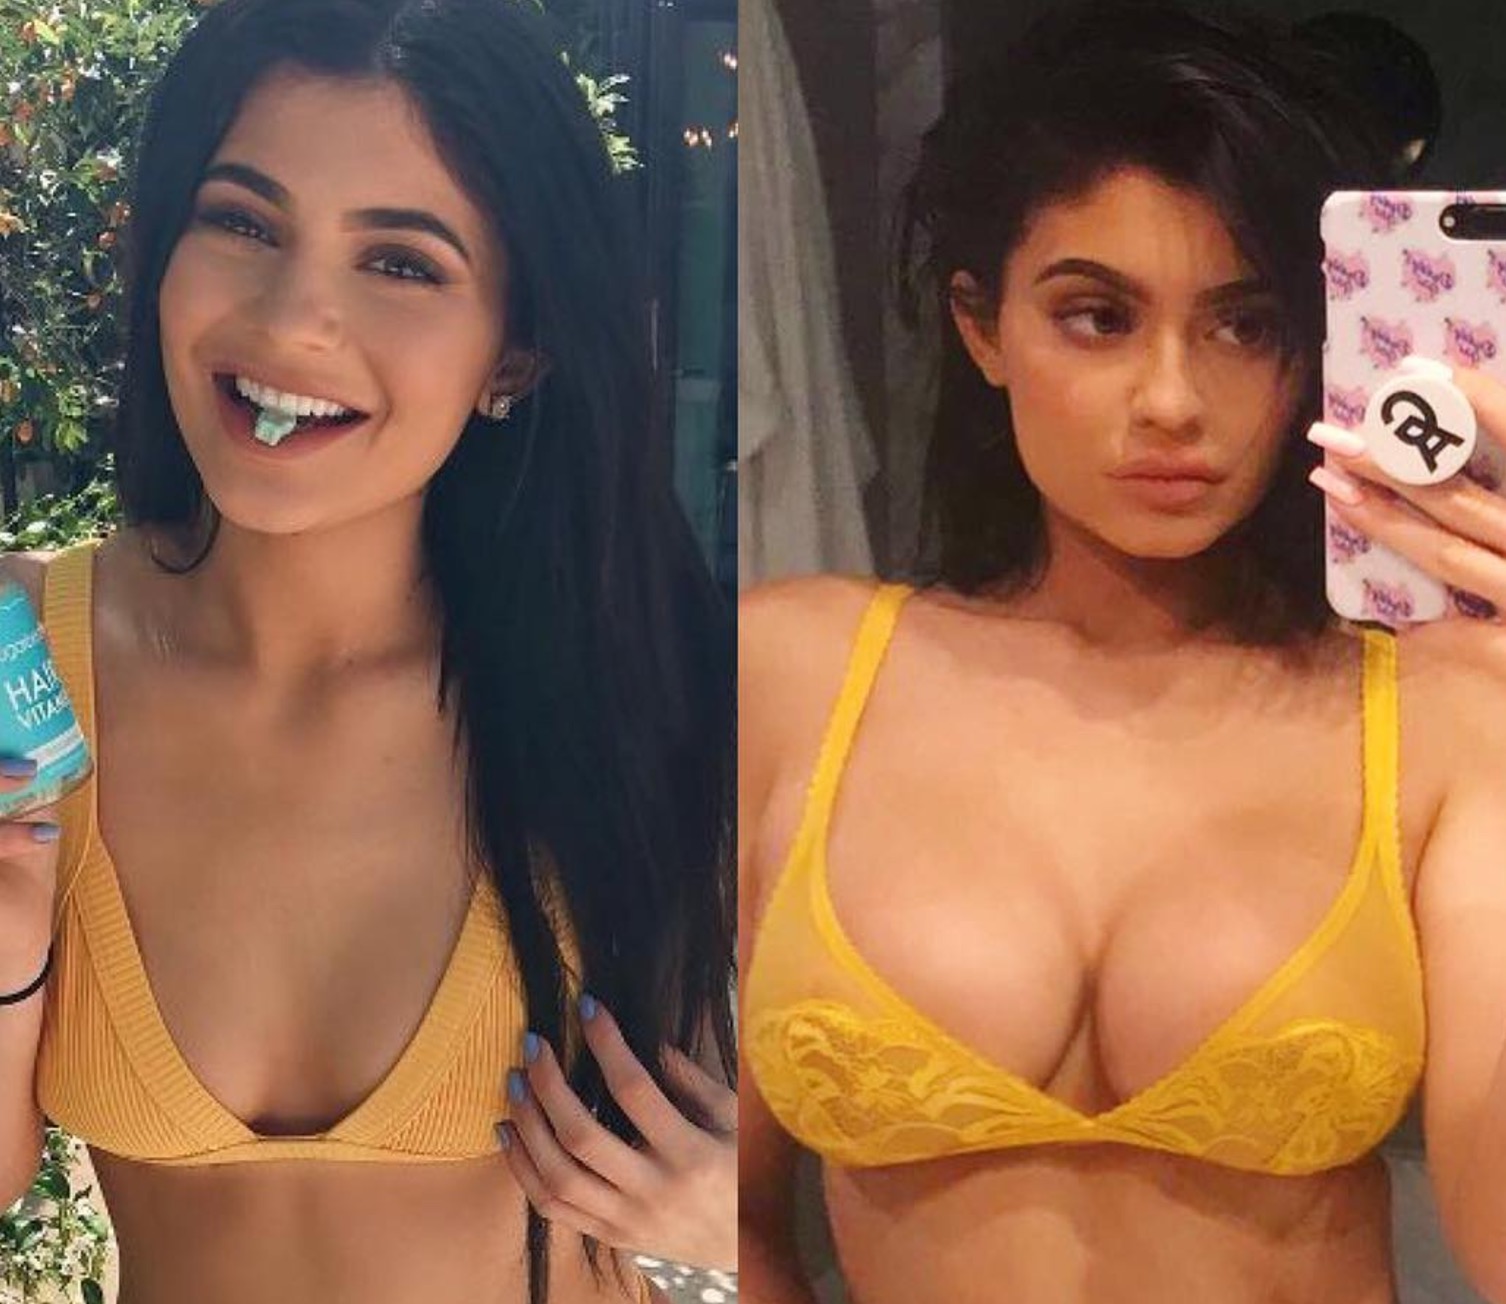 Kylie Jenner Shows Off New Store Bought Boobs on Instagram (Photos) .